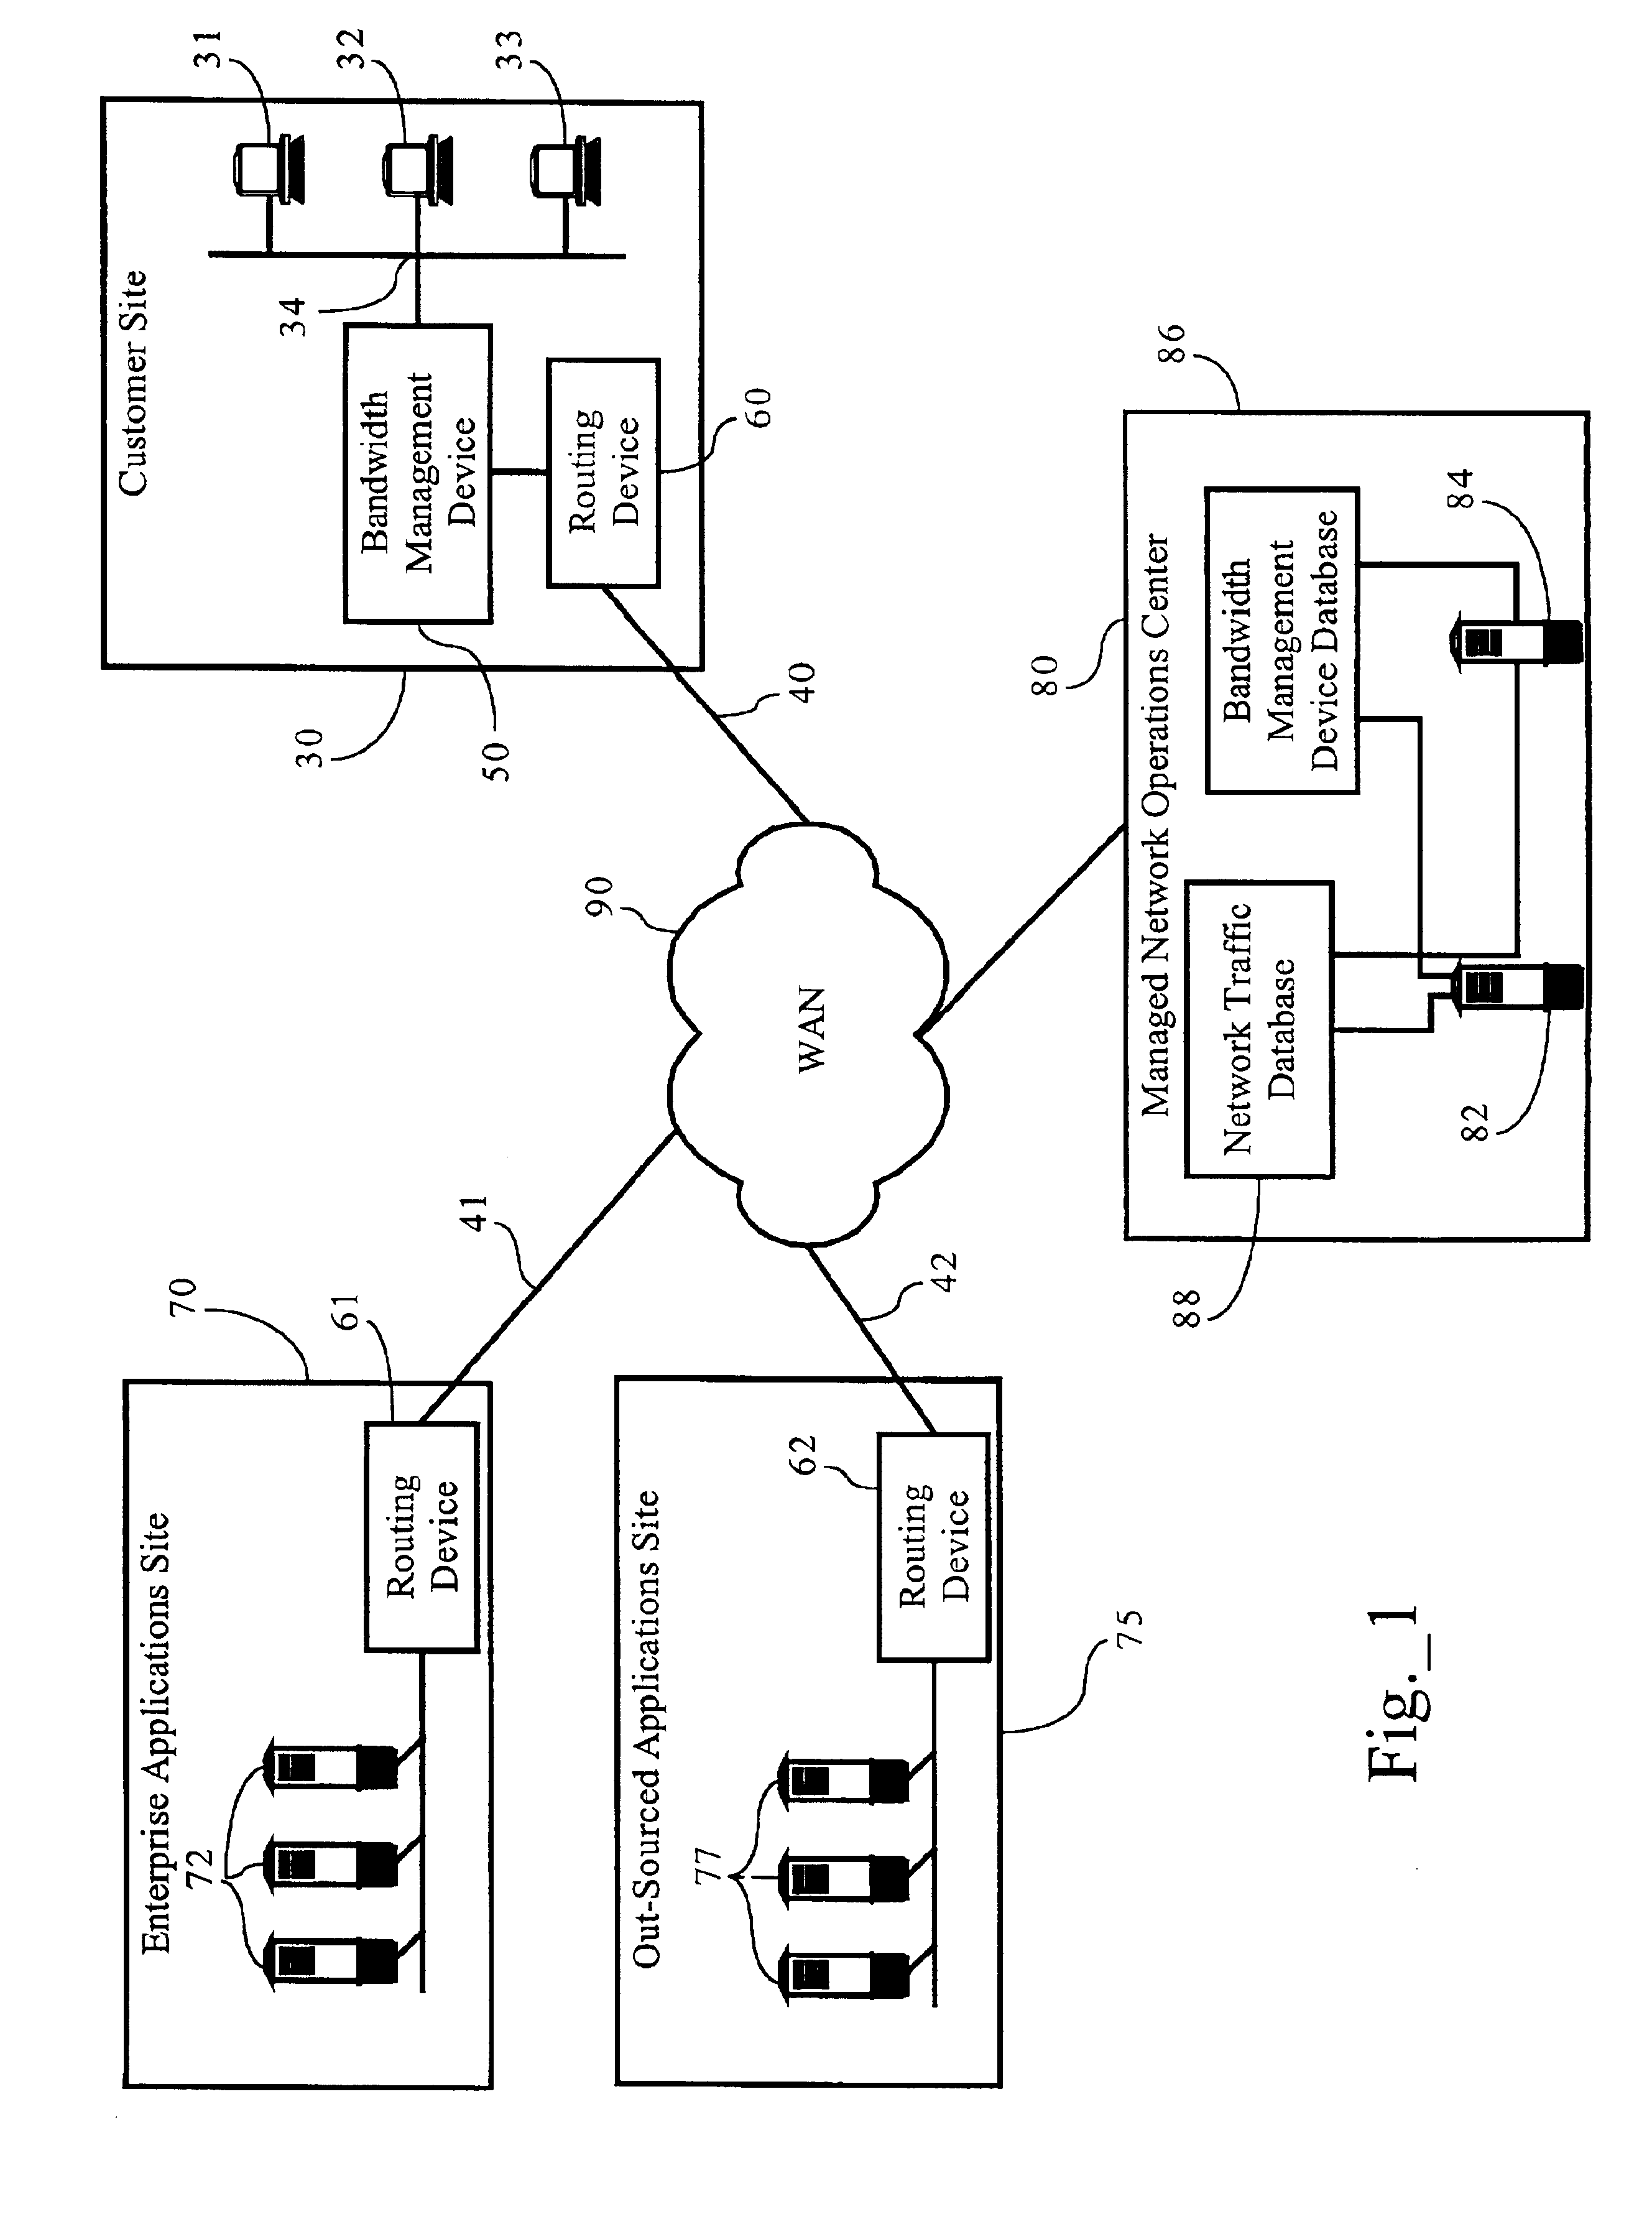 Methods, apparatuses and systems enabling a network services provider to deliver application performance management services